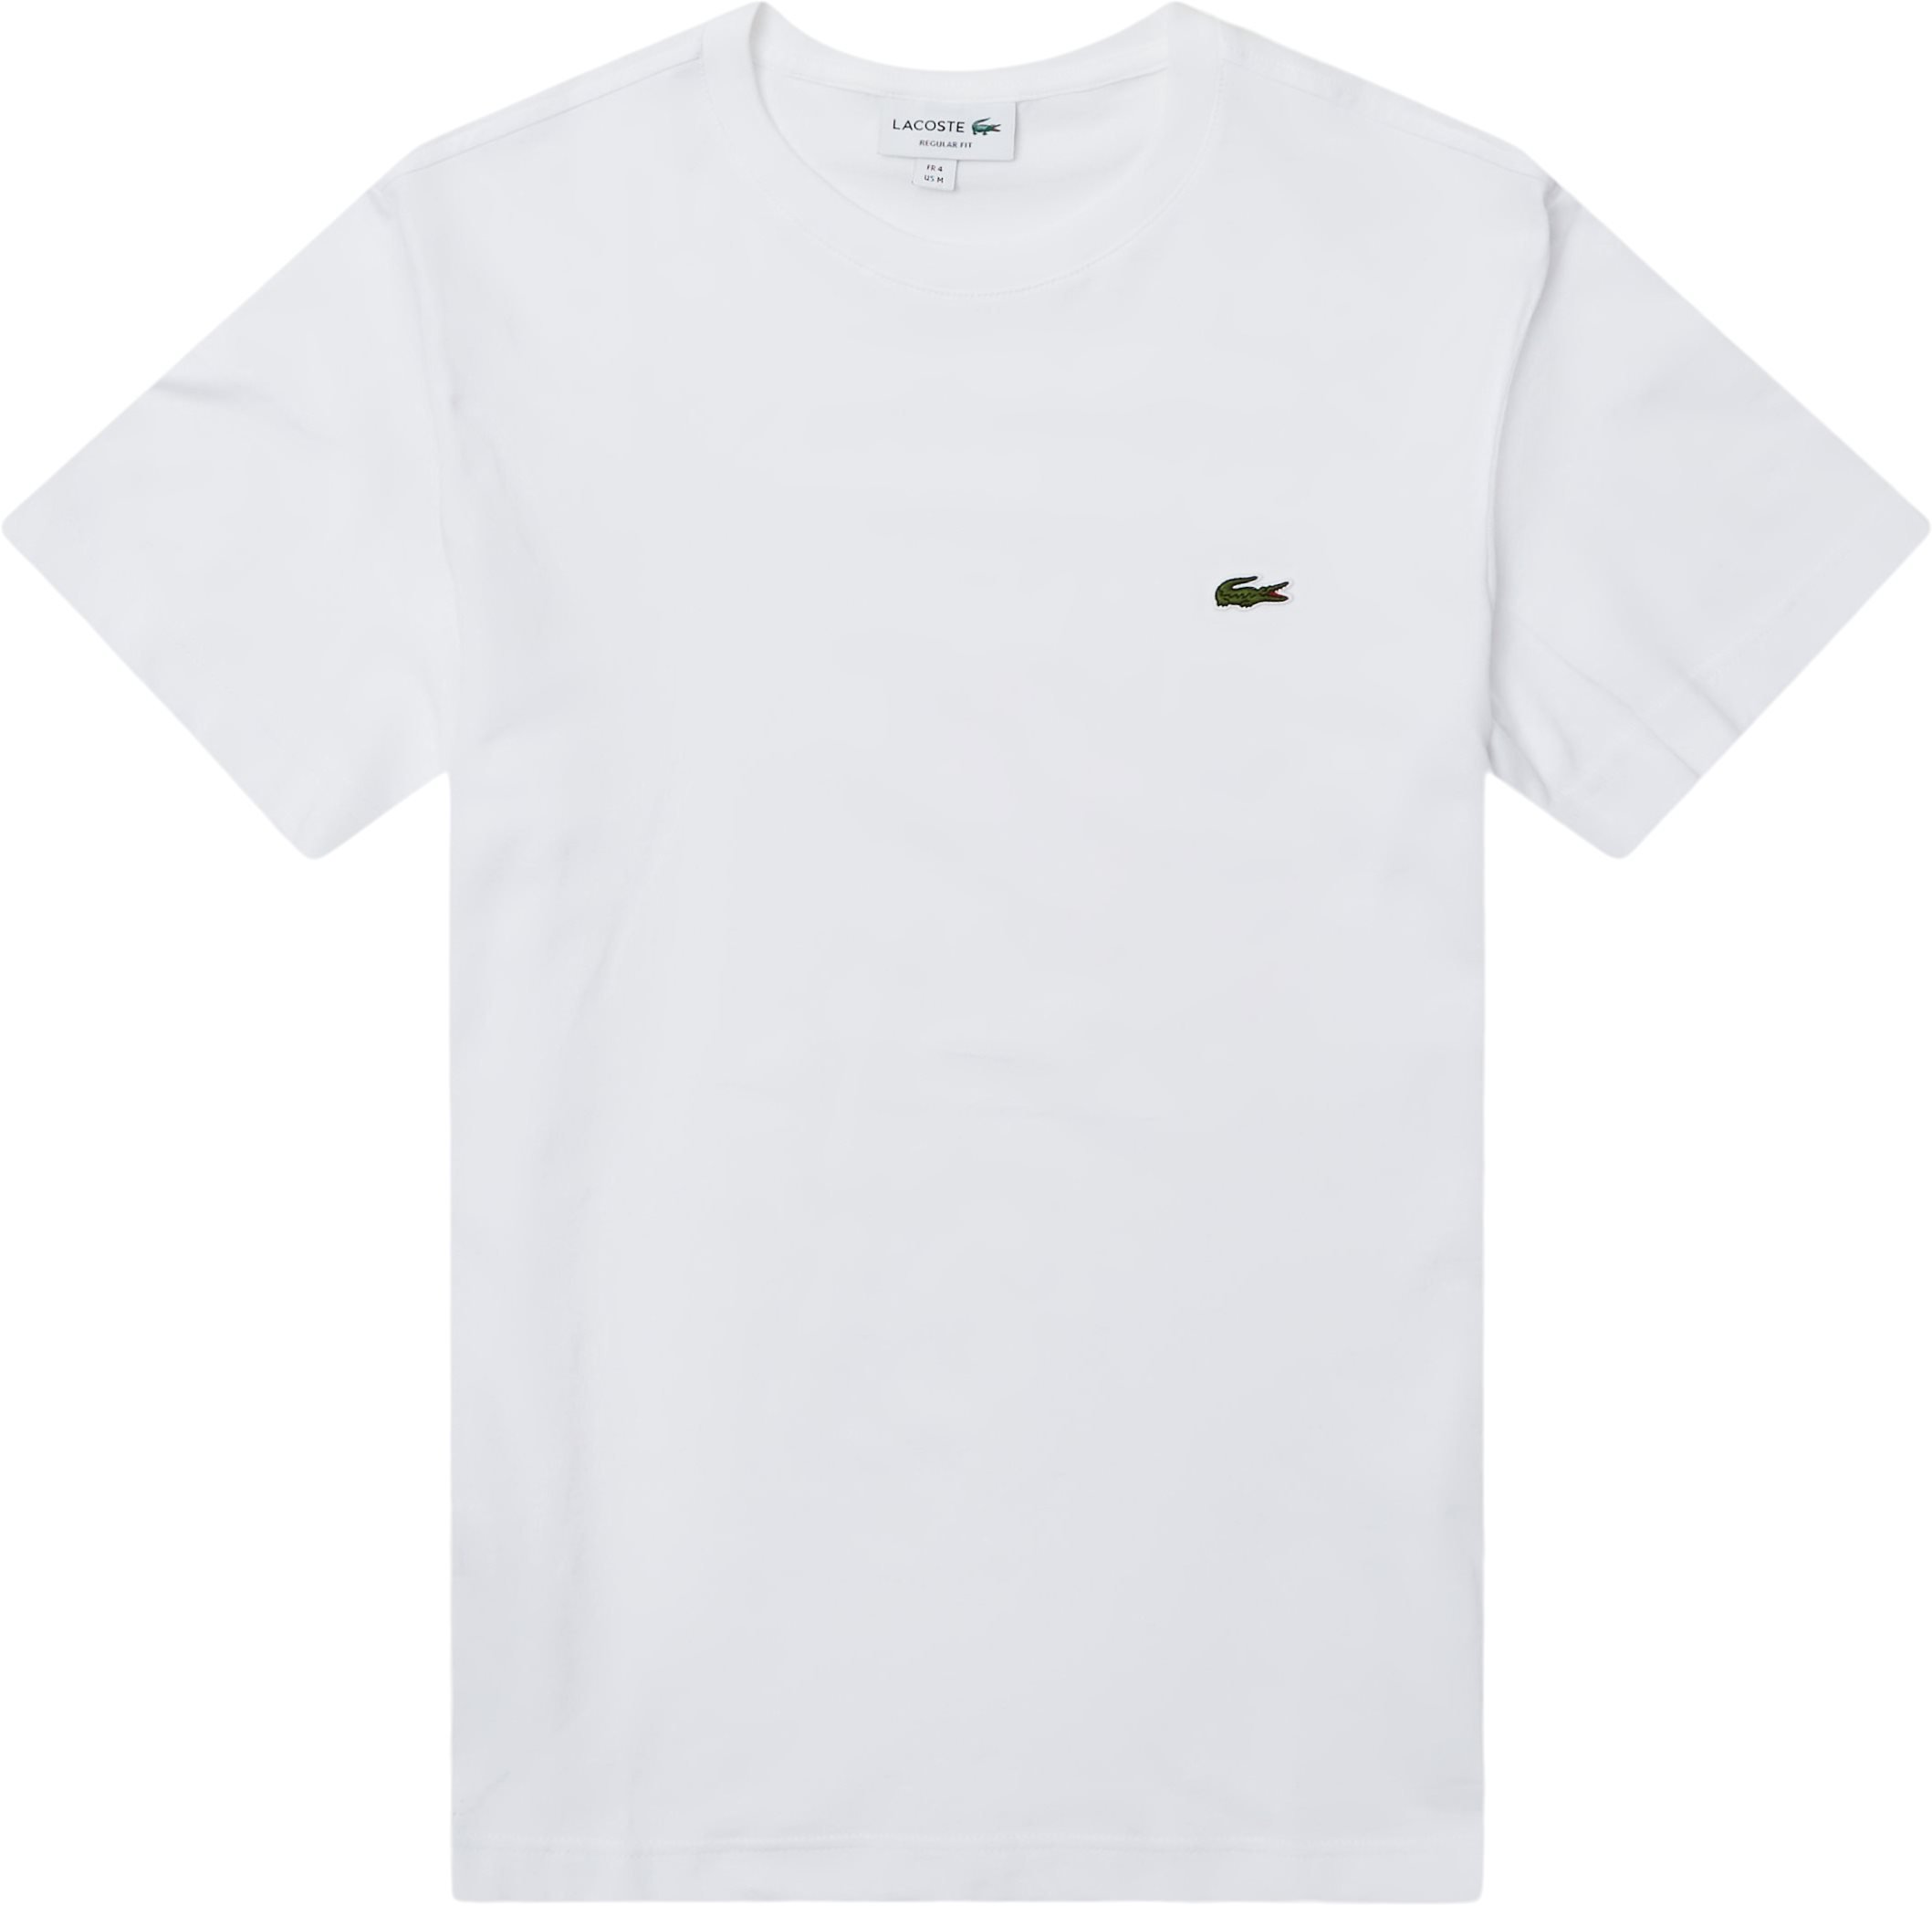 Th1207 Tee - T-shirts - Regular fit - White